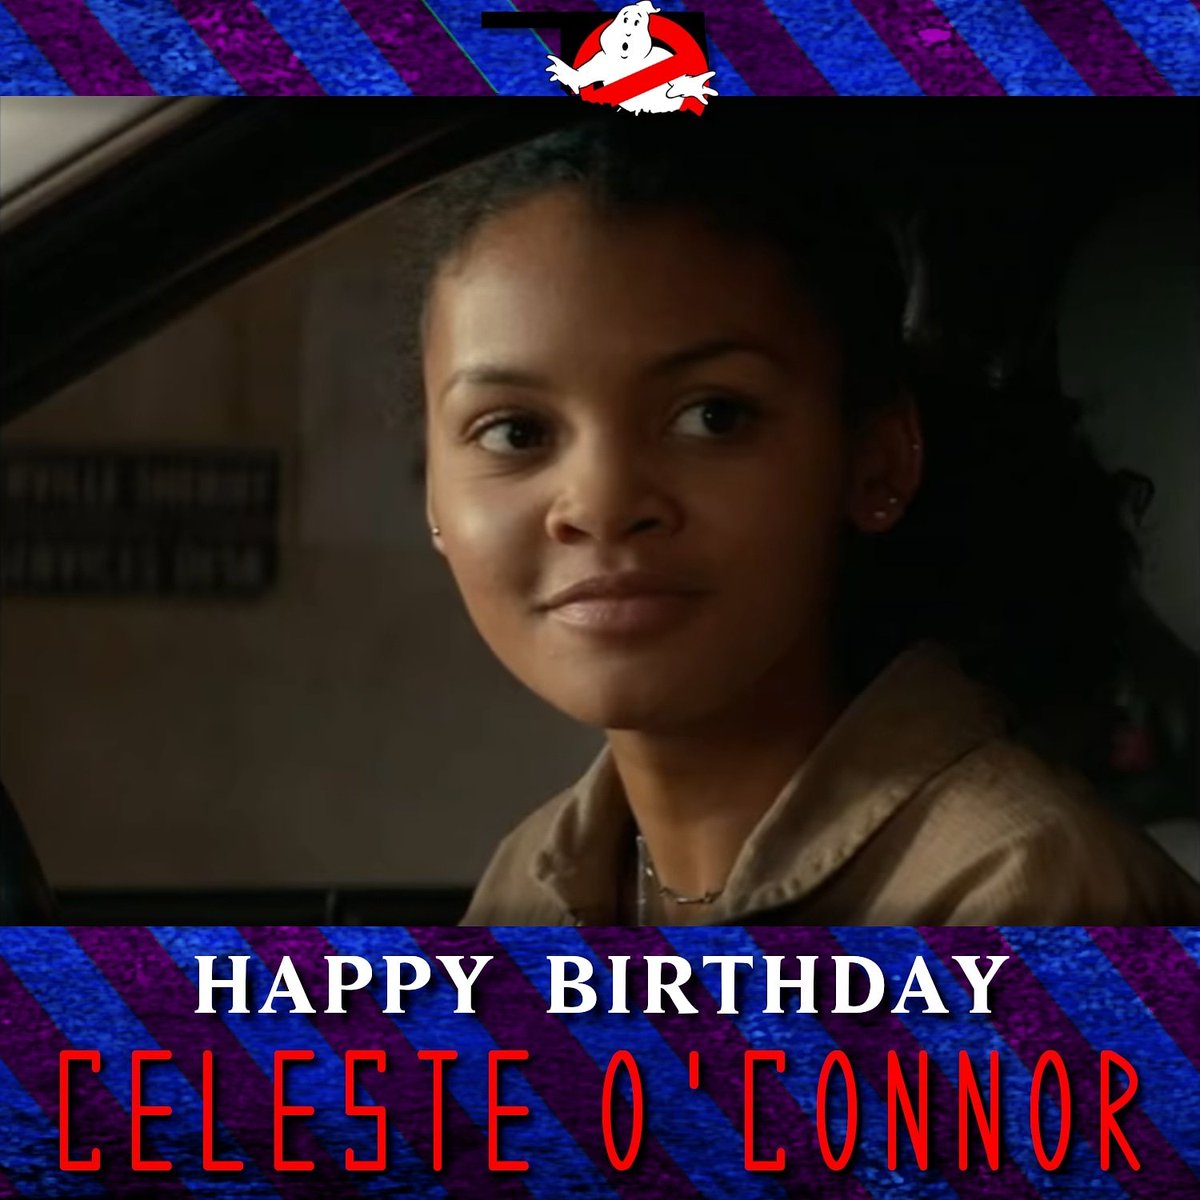 Wishing the wonderful @celeste_oconn a very Happy Birthday today! We're Lucky to have them in the GB Fam! 🍀

#Ghostbusters #GhostbustersAfterlife #CelesteOConnor #Lucky #LuckyDomingo #Birthday